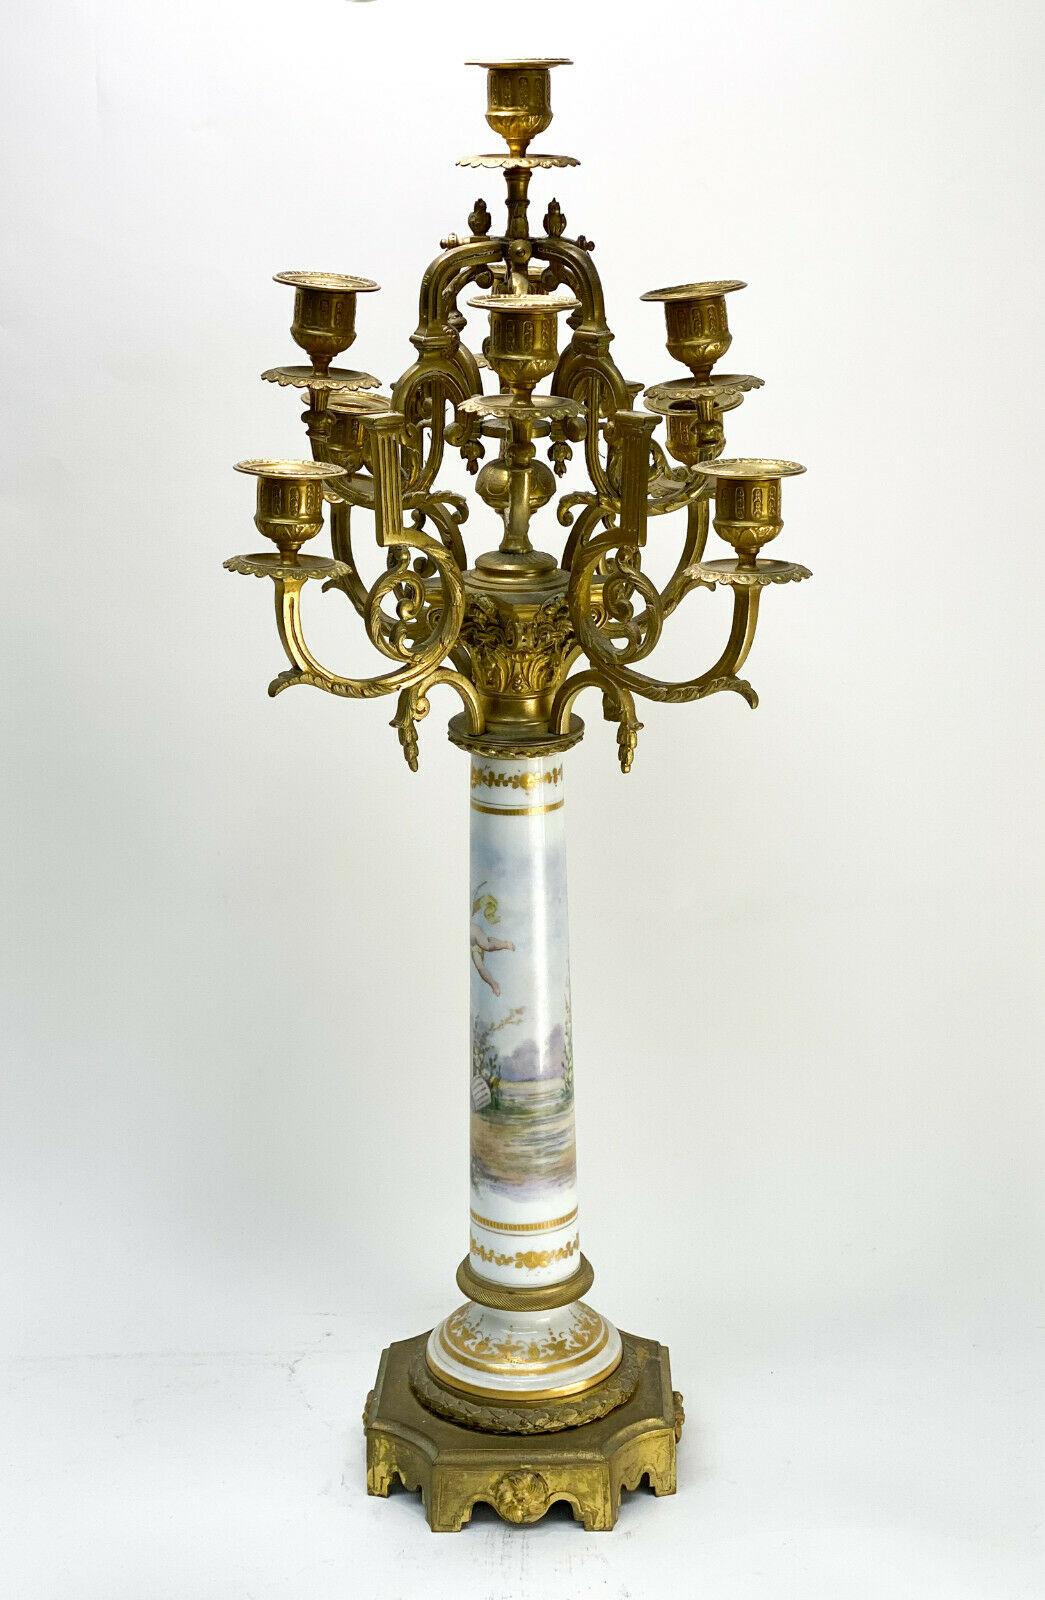 Sevres Style Porcelain & Gilt Bronze 10 Arm candelabra, circa 1900. Cherubs

The stem of the candelabra depicts a hand painted cherub chasing a bird Artist signed. Foliate scroll arms to the lights.

Additional information:
Department: Adults